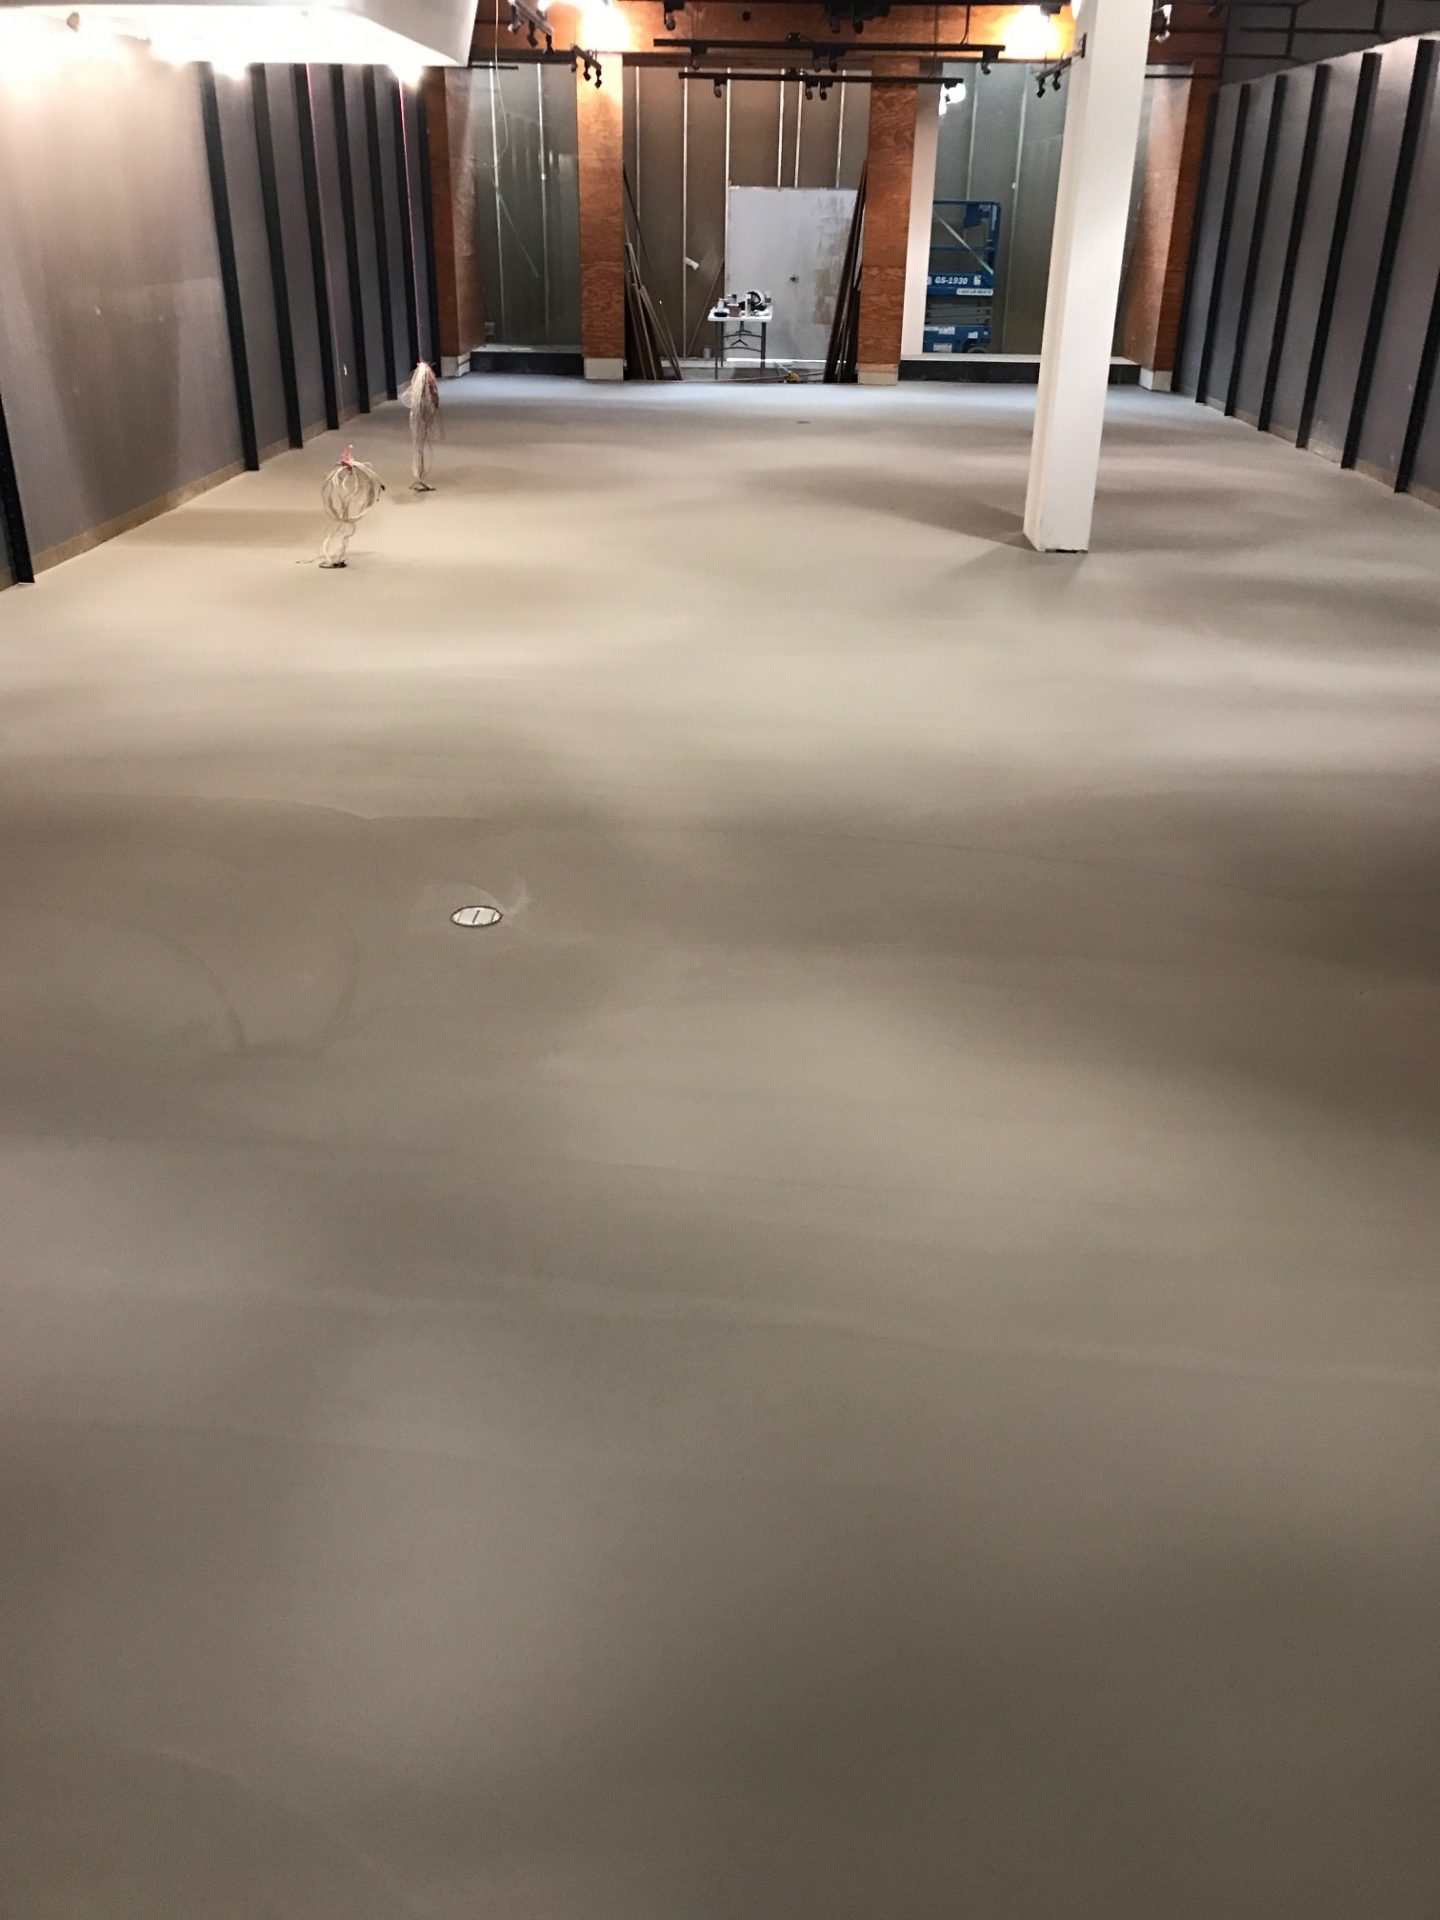 Zumiez red deer mall, 1 of 11 stores total we did across western Canada. -new self leveled concrete overlay sealed with a clear sealer.